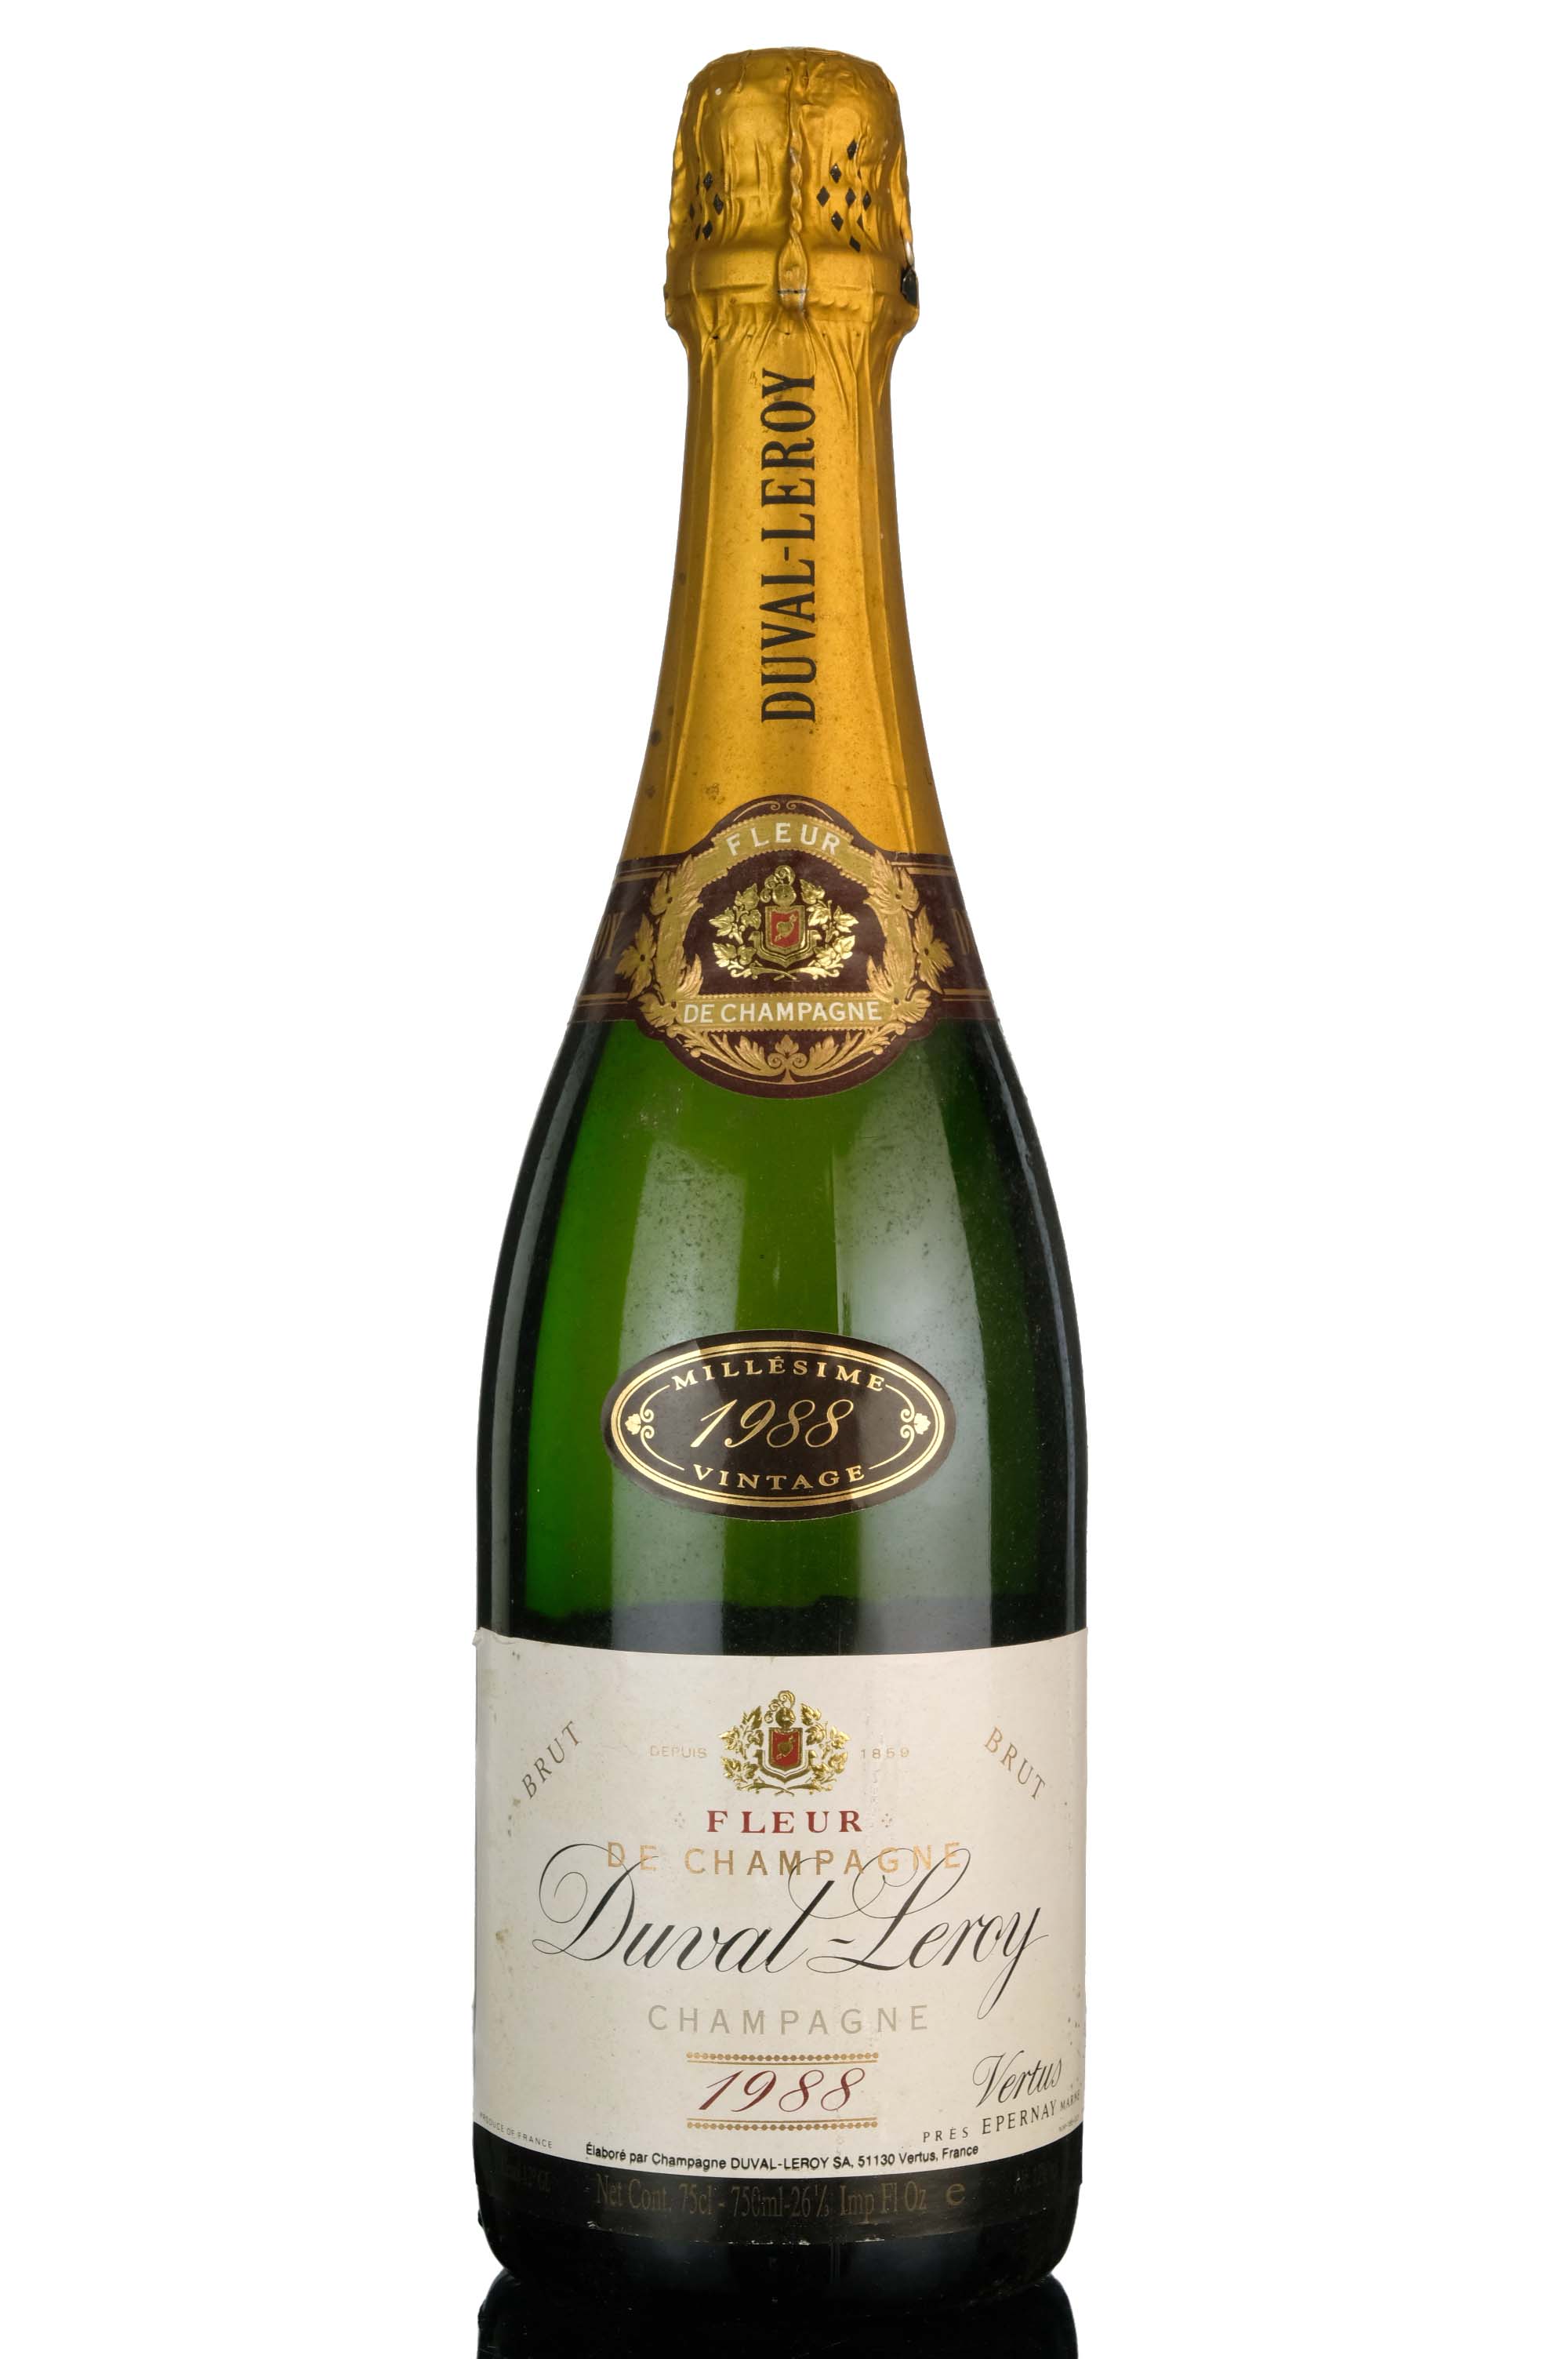 Duval-Leroy 1988 Champagne